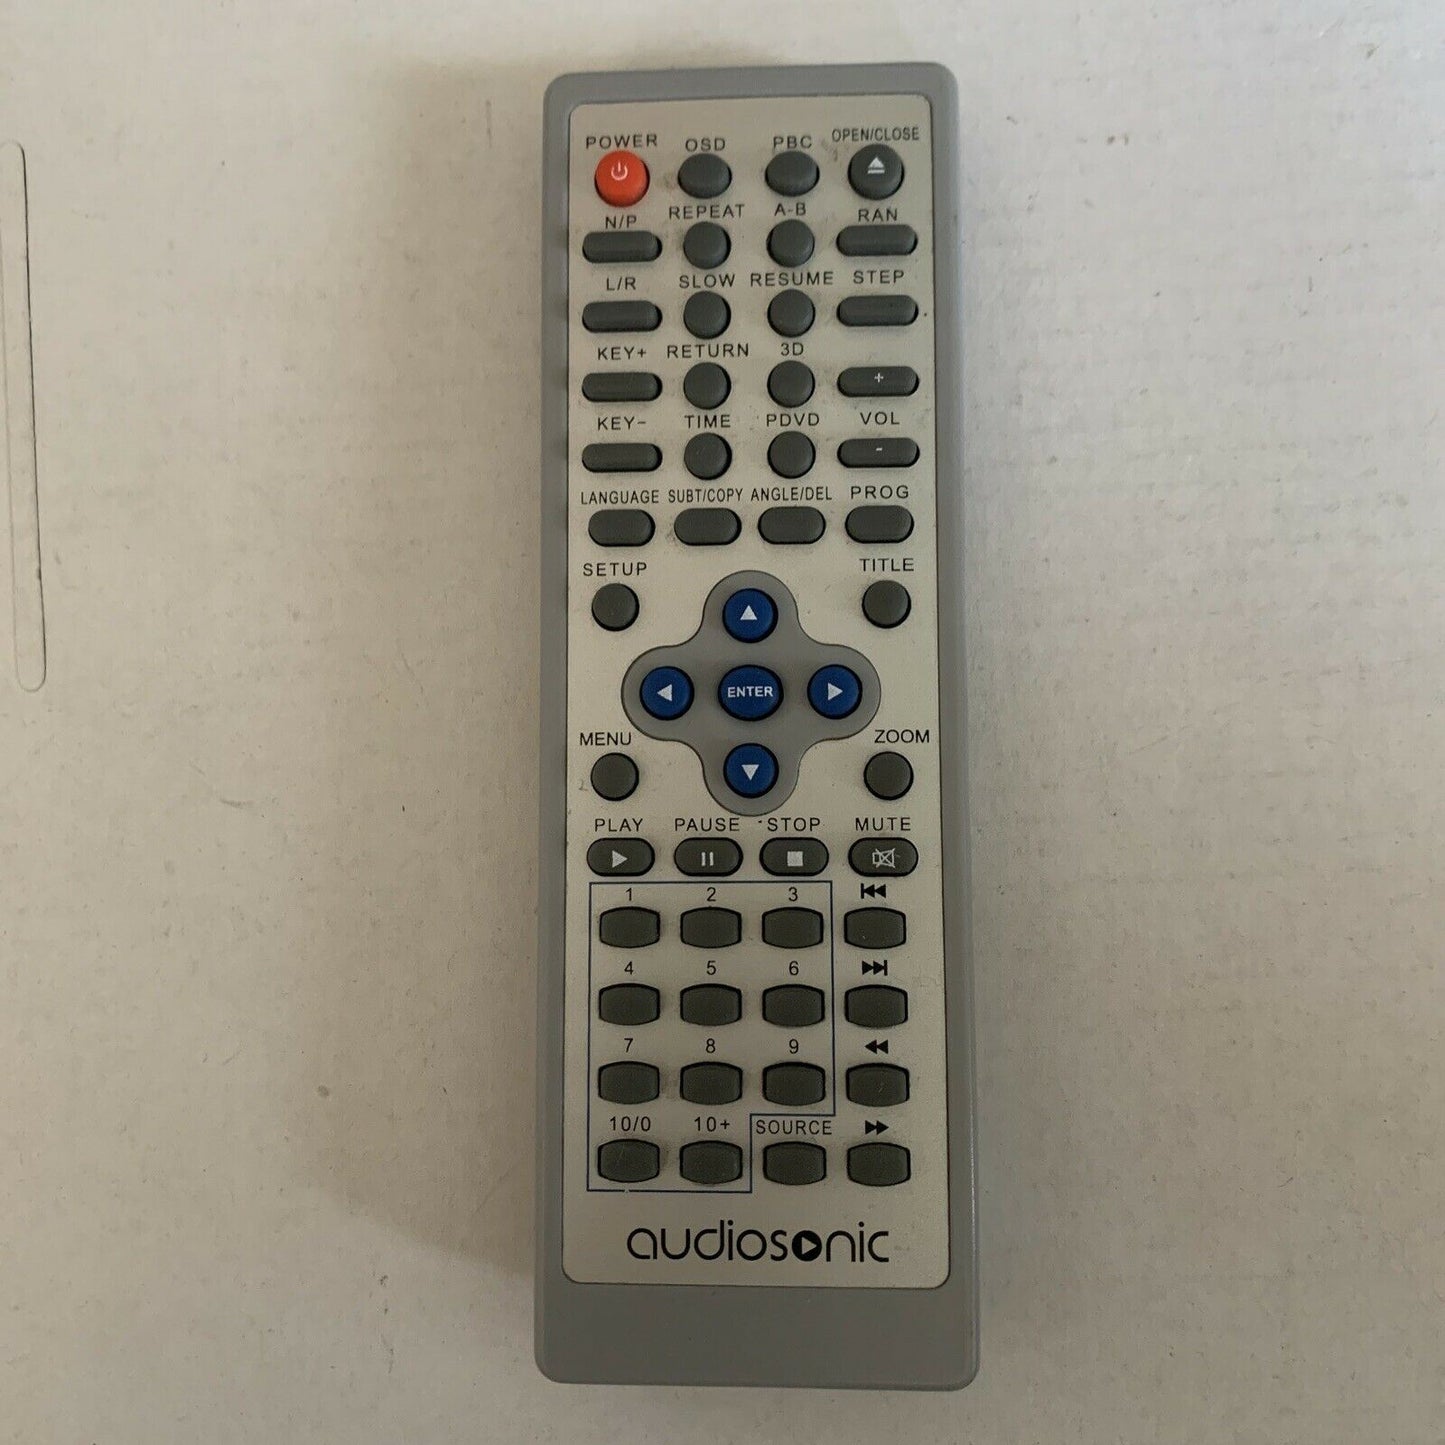 Audiosonic CX-501 Remote Control For DVD Player